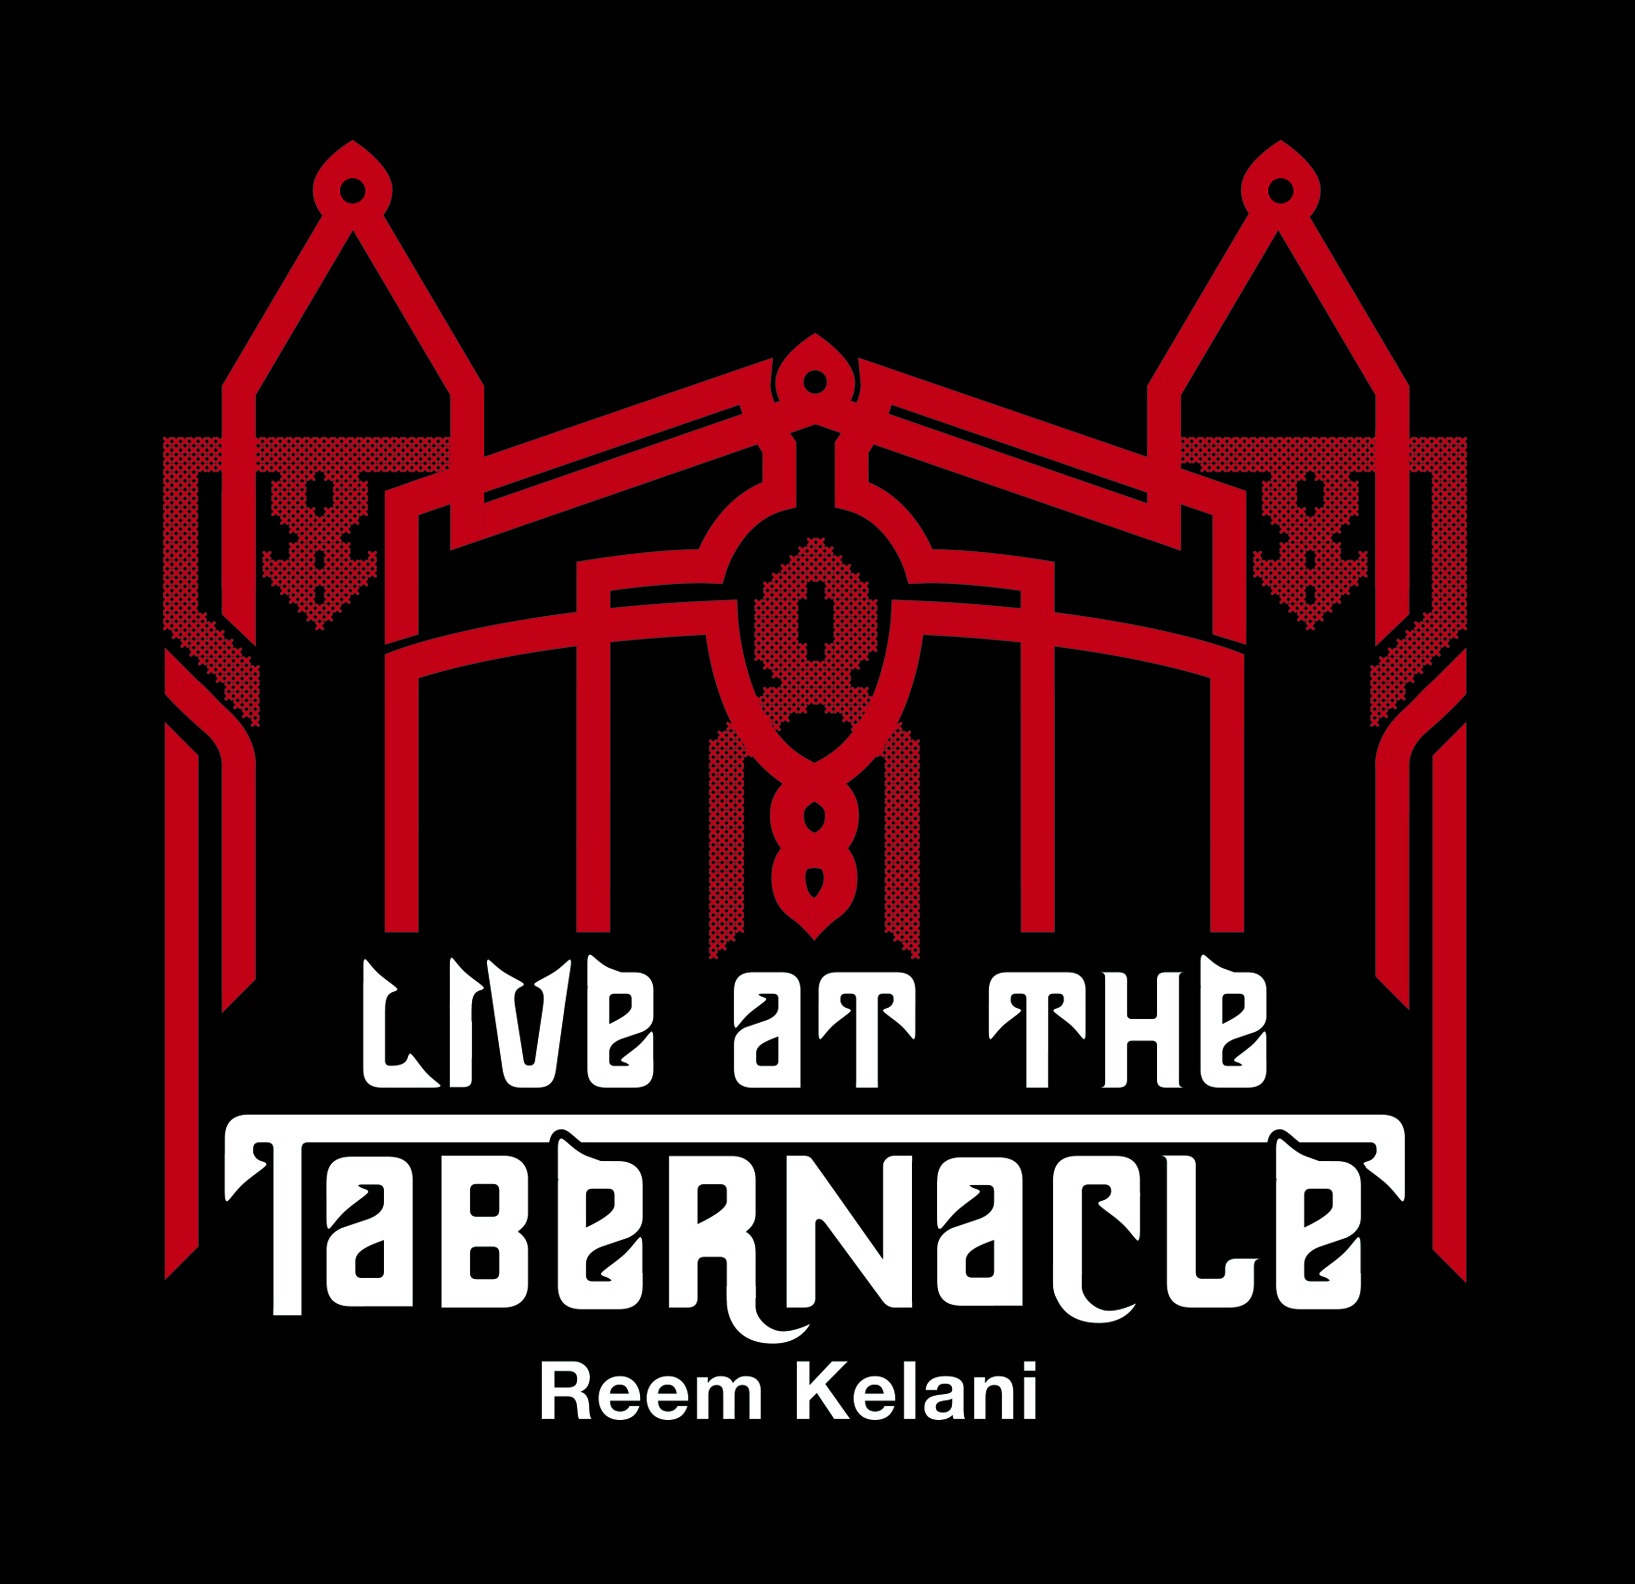 Cover of "Reem Kelani: Live at the Tabernacle" (produced by Fuse Records)